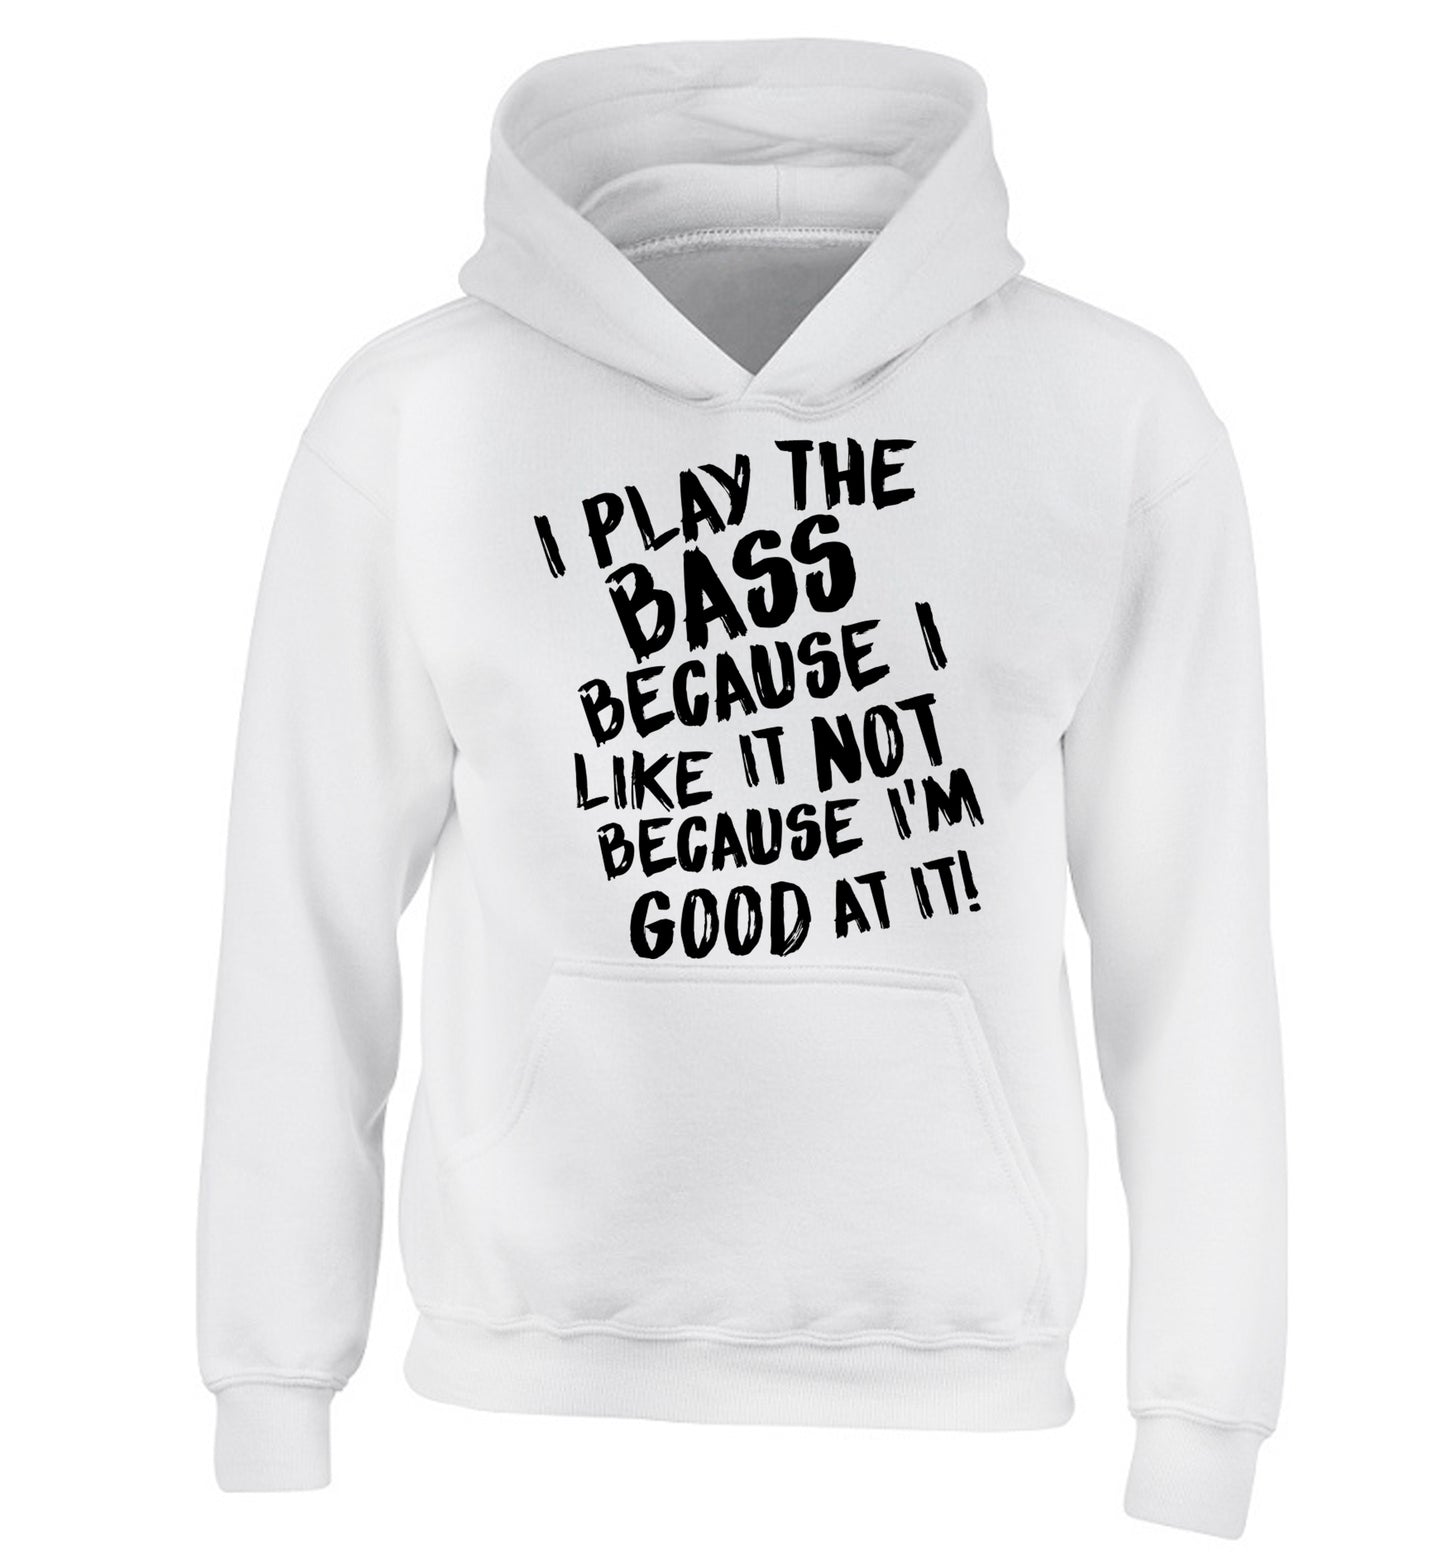 I play the bass because I like it not because I'm good at it children's white hoodie 12-14 Years